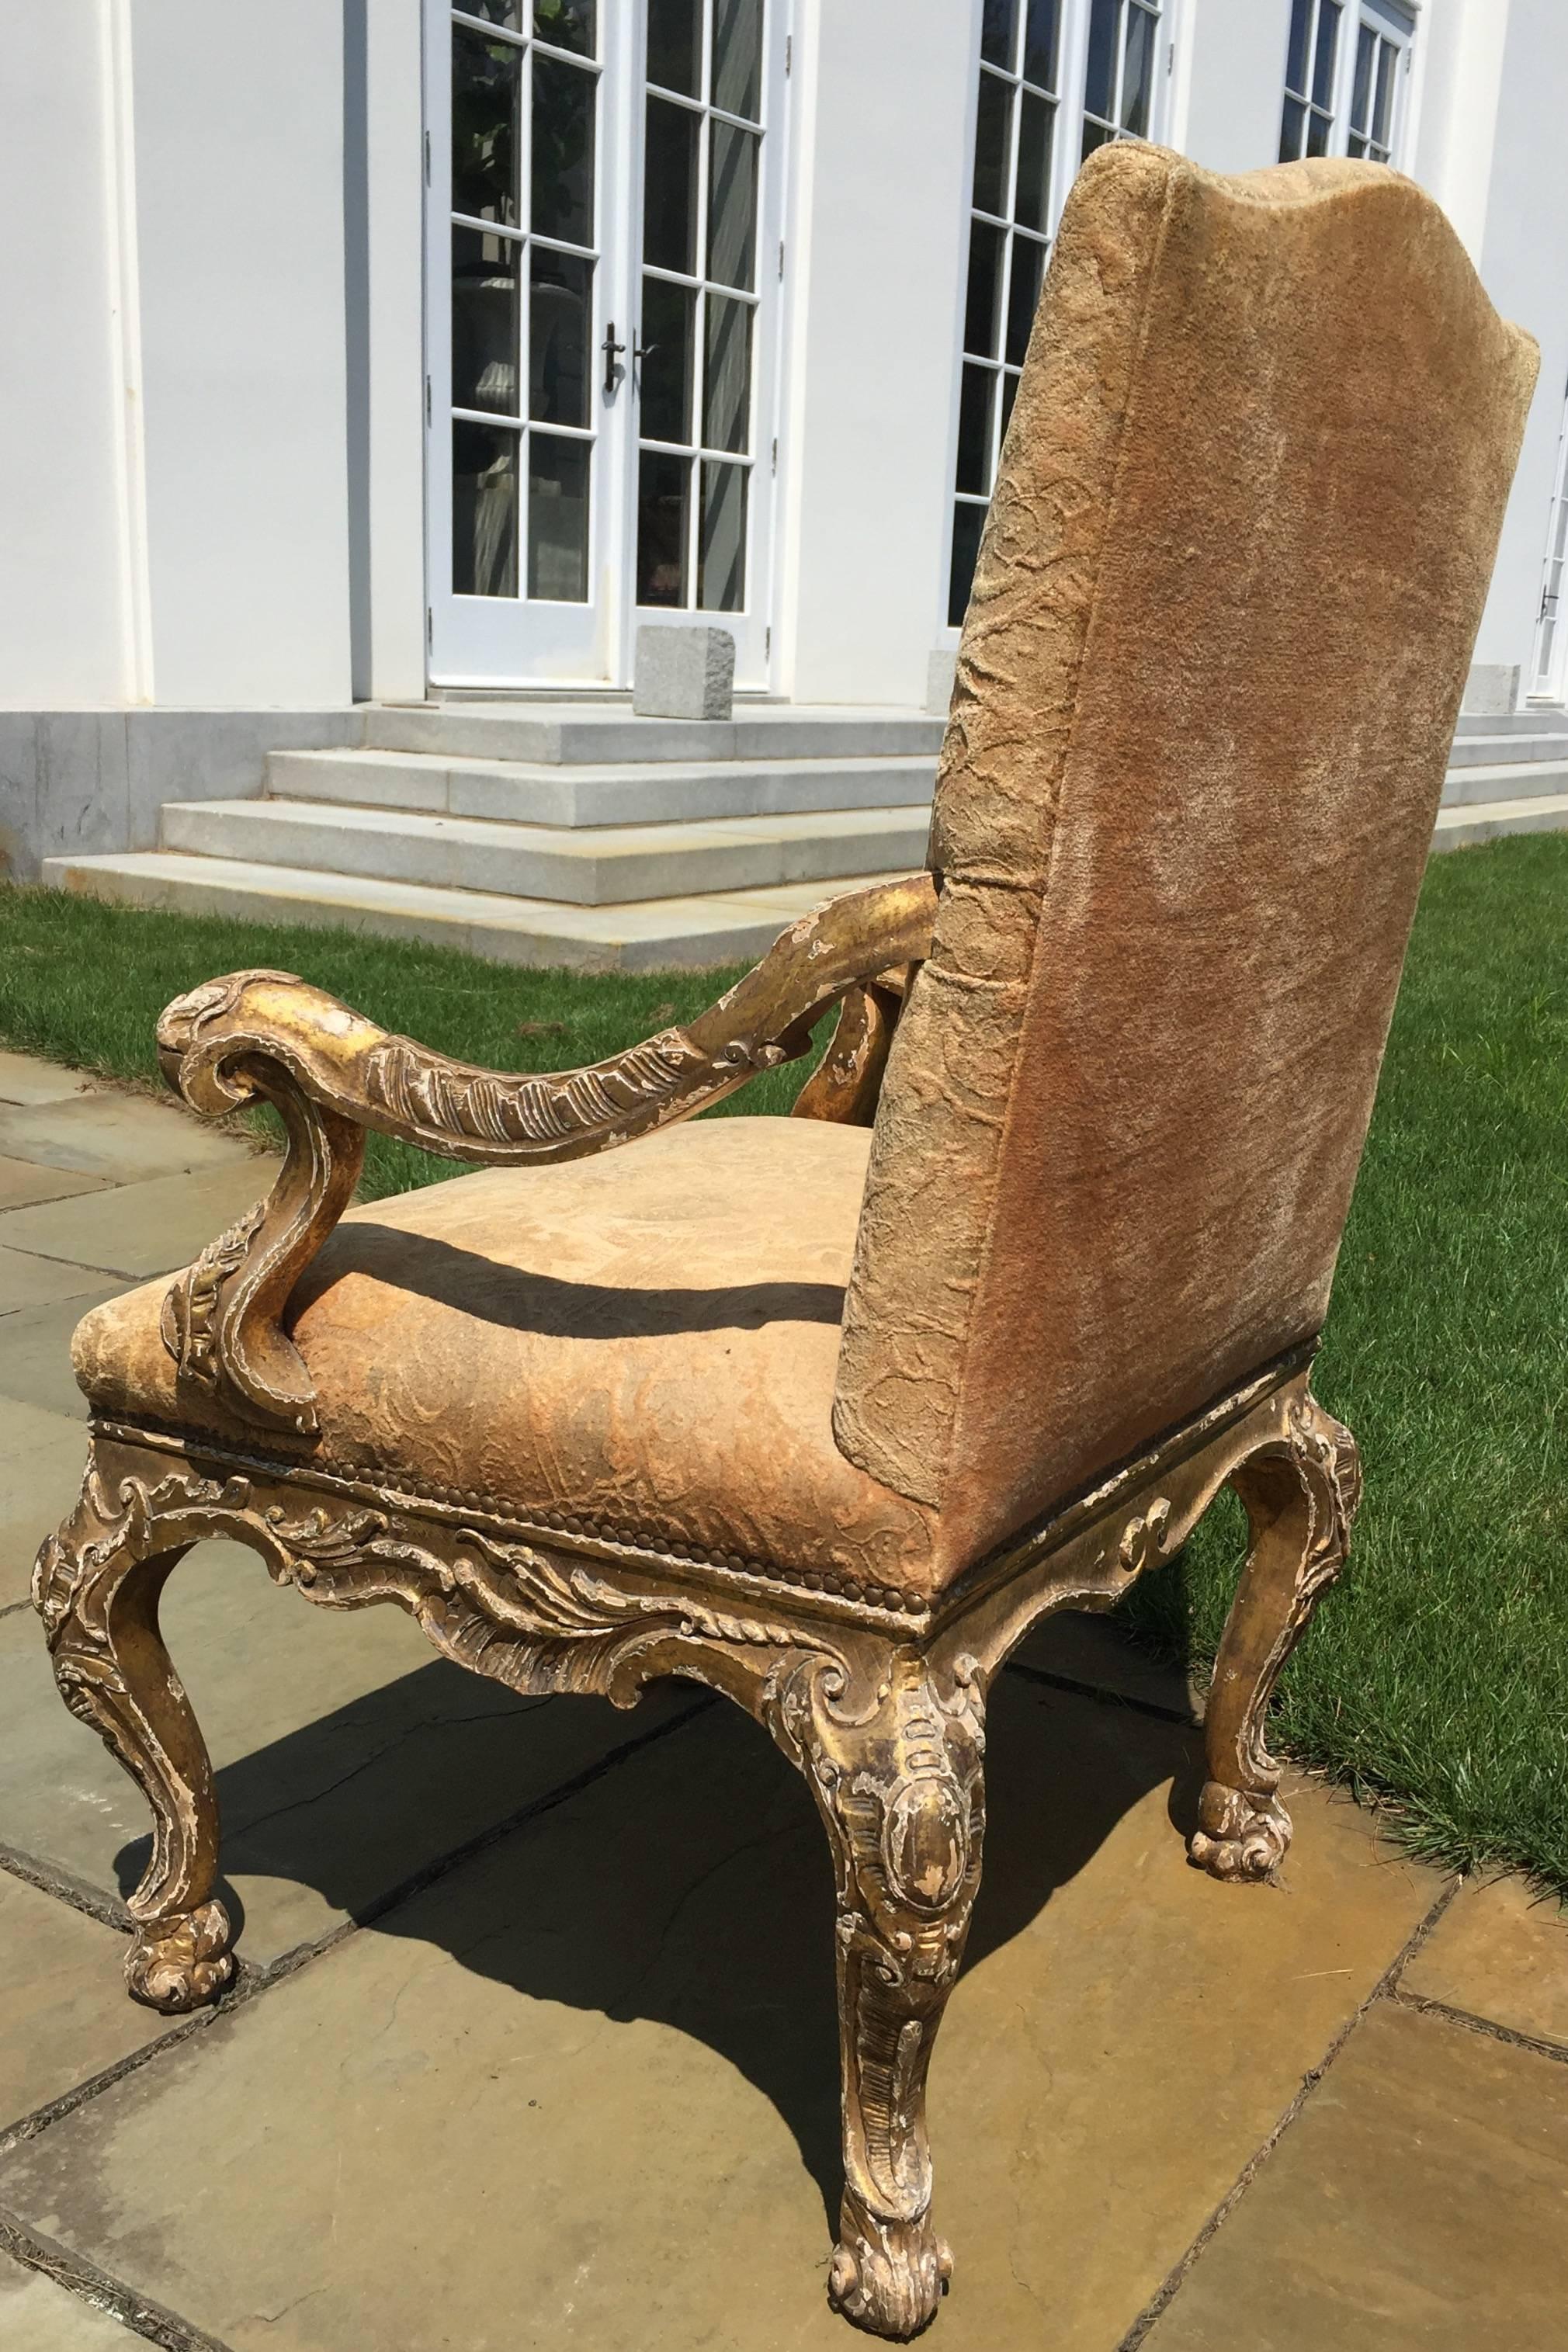 This beautifully hand carved Arm Chair looks like it dates from the Baroque Period, because the gold has distressing throughout that gives it the appearance of hundreds of years of age. It is constructed extremely well out of hardwood.